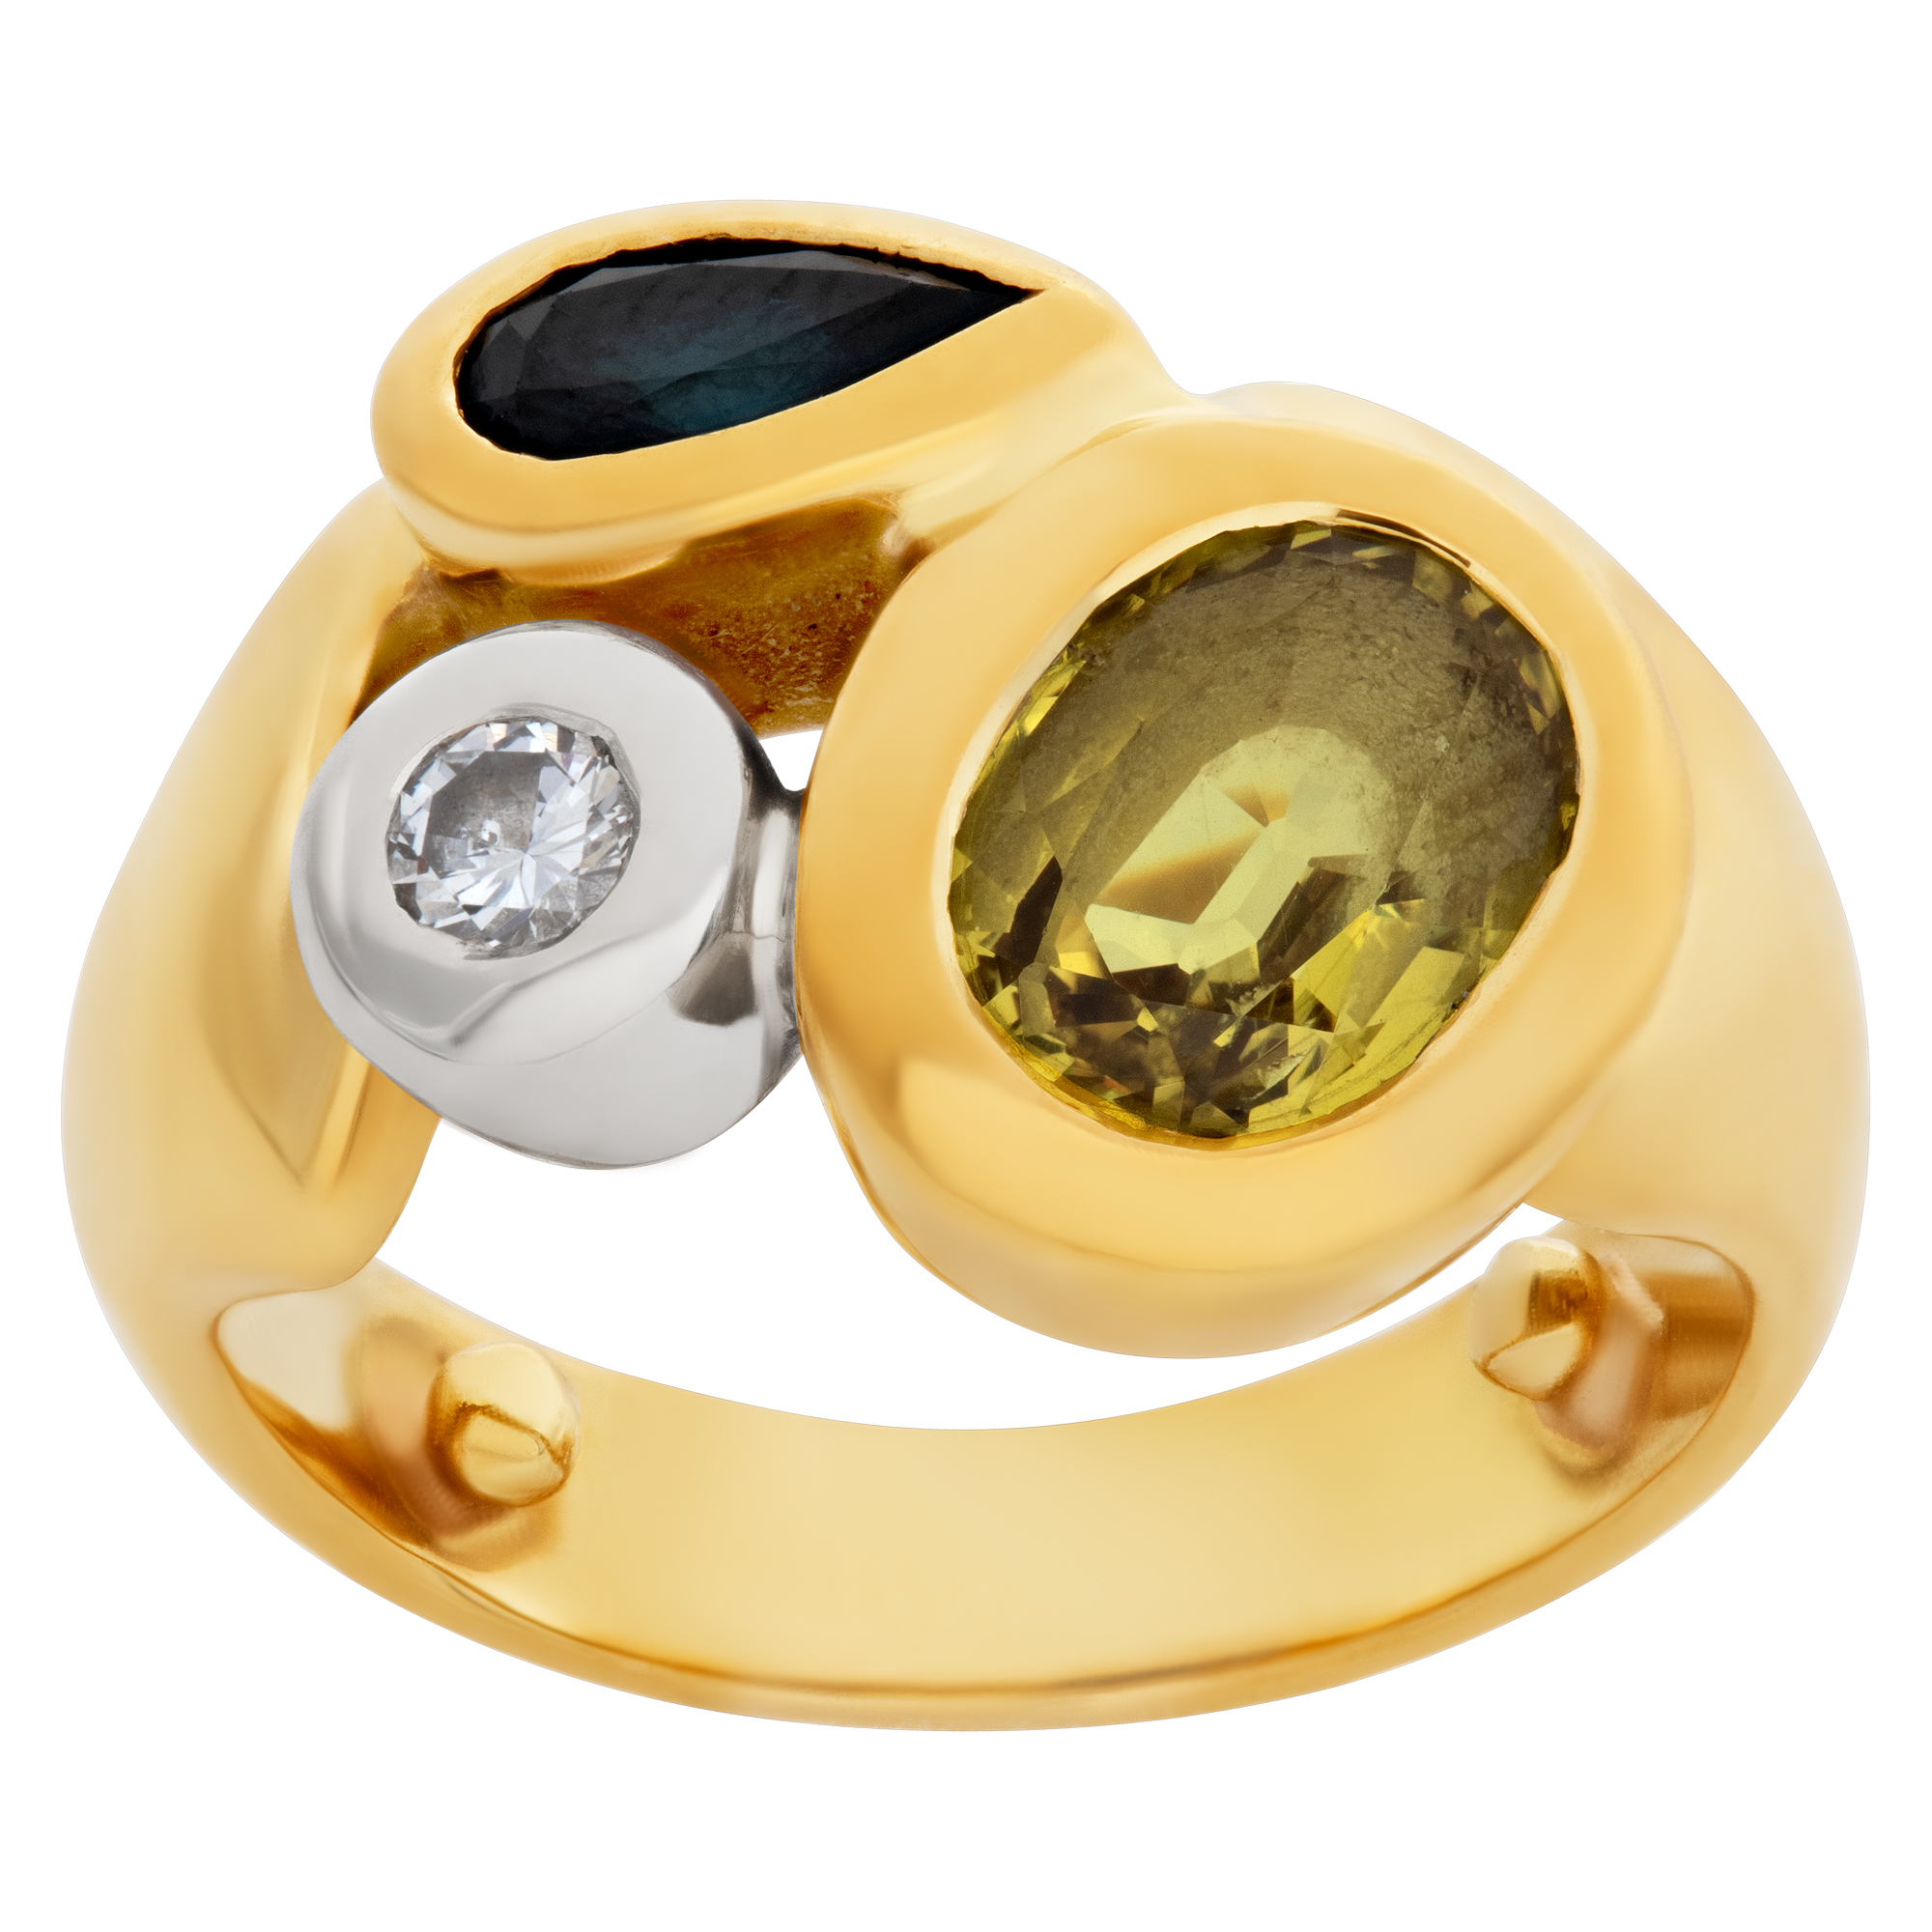 Pinky Ring In 18k With Diamond, Yellow Topaz, And Deep Blue Topaz